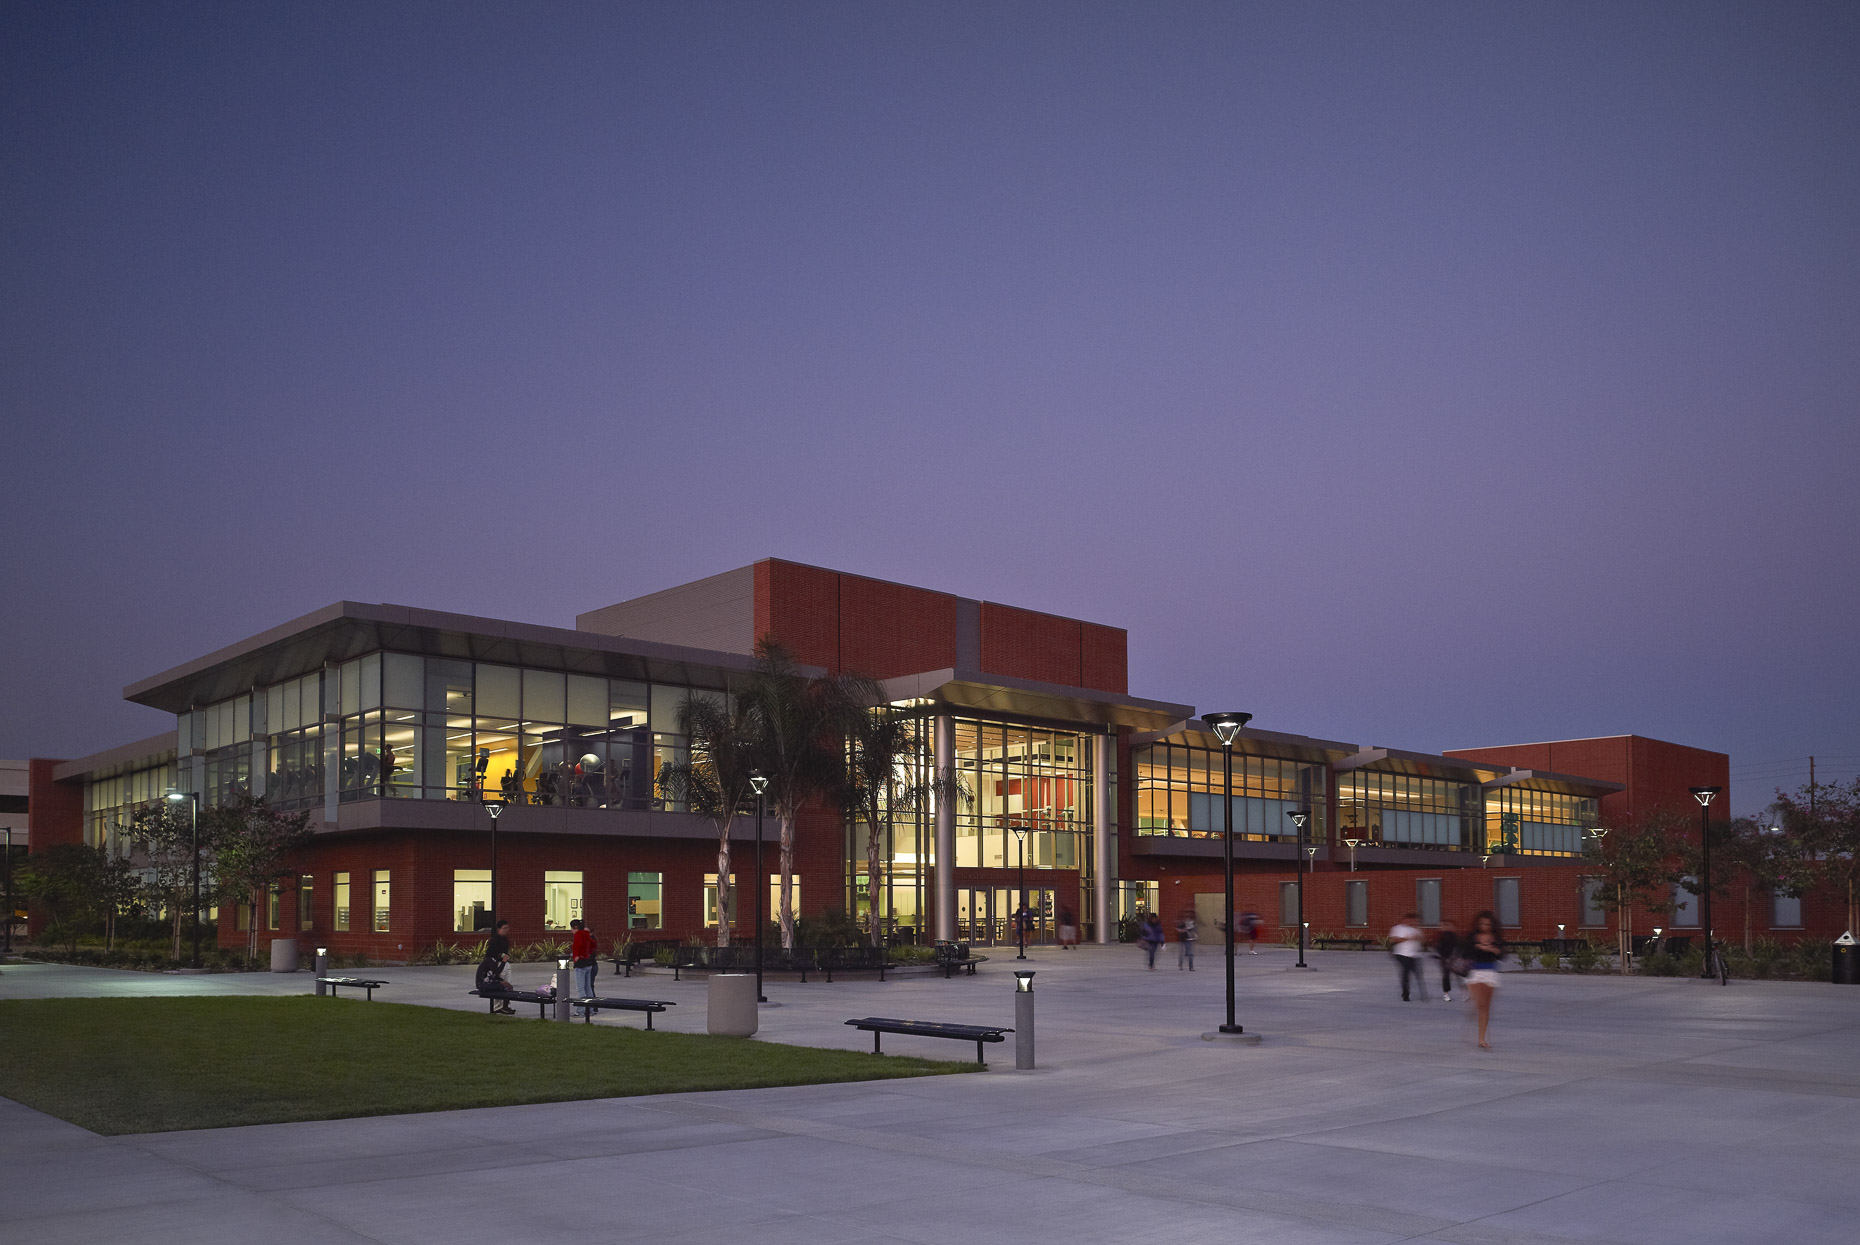 Cal State Long Beach Recreation & Wellness Center by Cannon Design photographed by Brad Feinknopf based in Columbus, Ohio